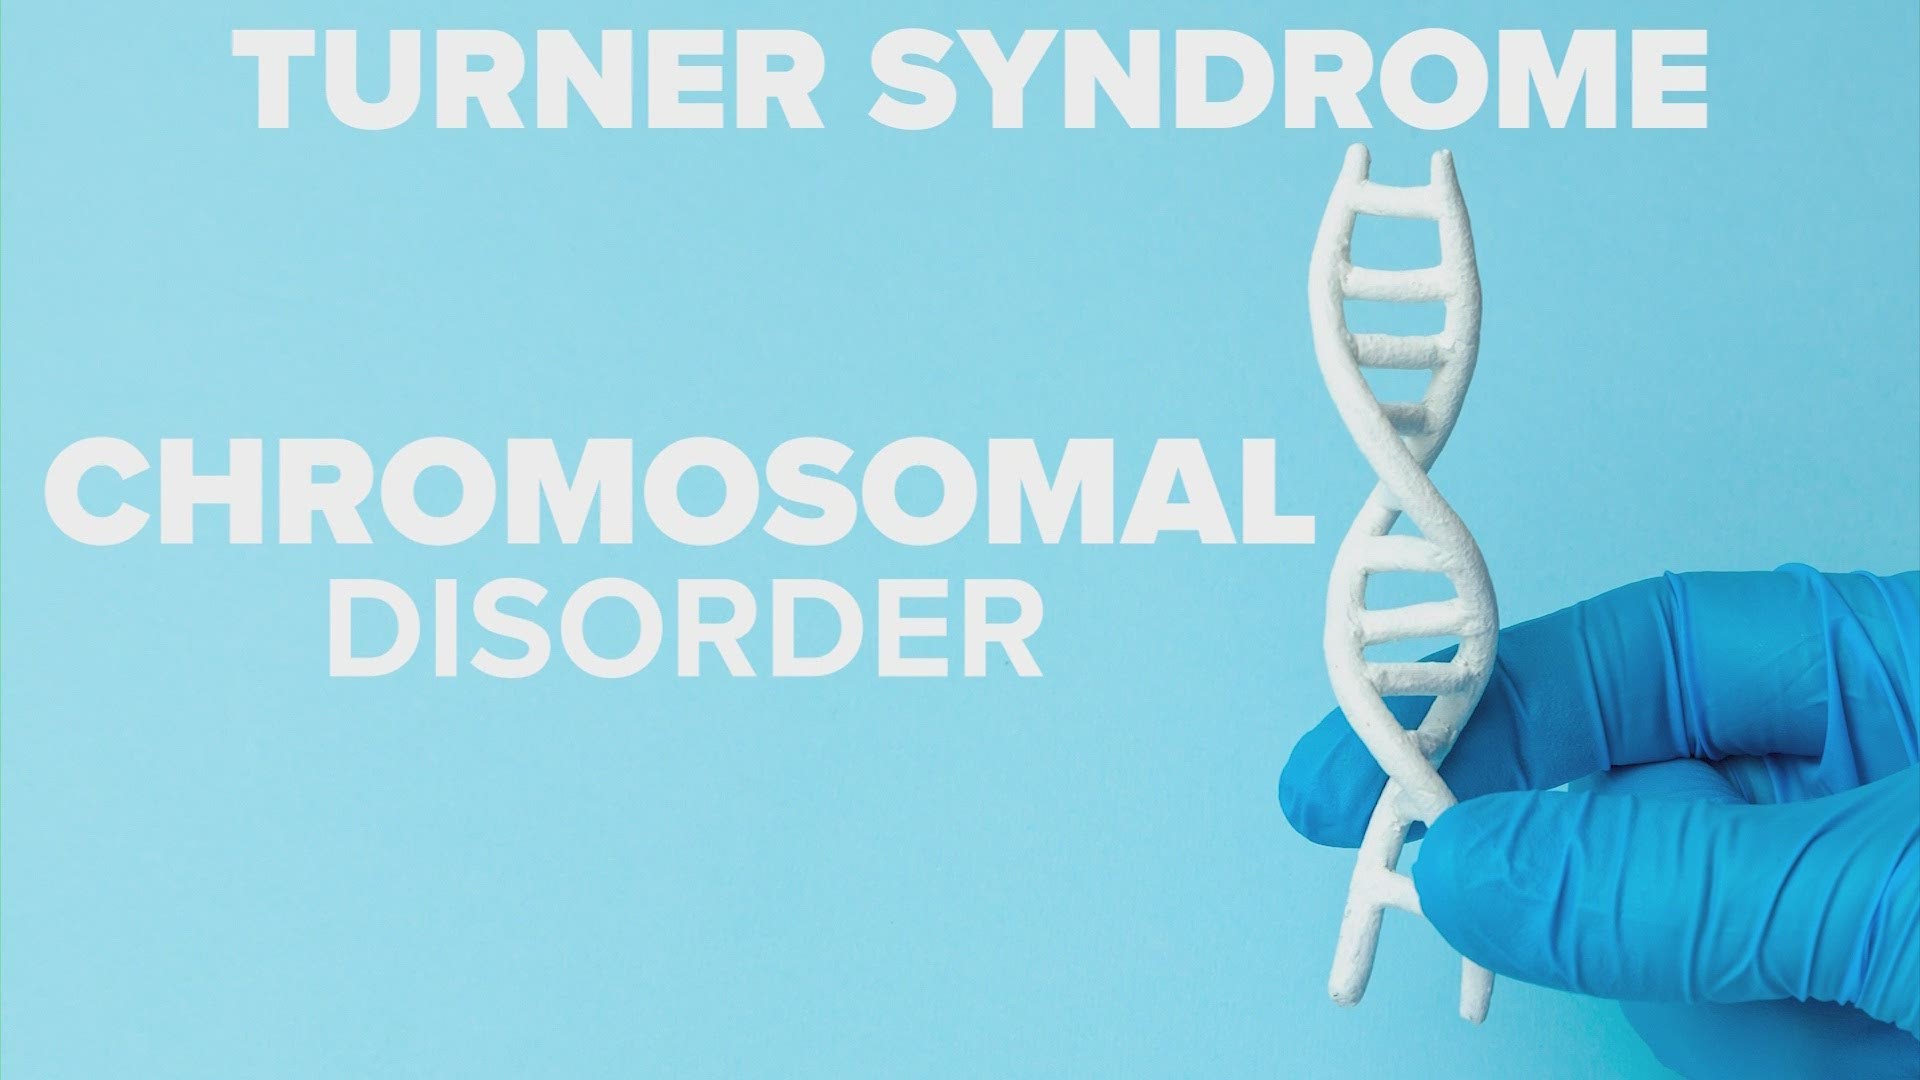 UT Physicians has a care center that treats Turner Syndrome, a rare disease that affects only women.